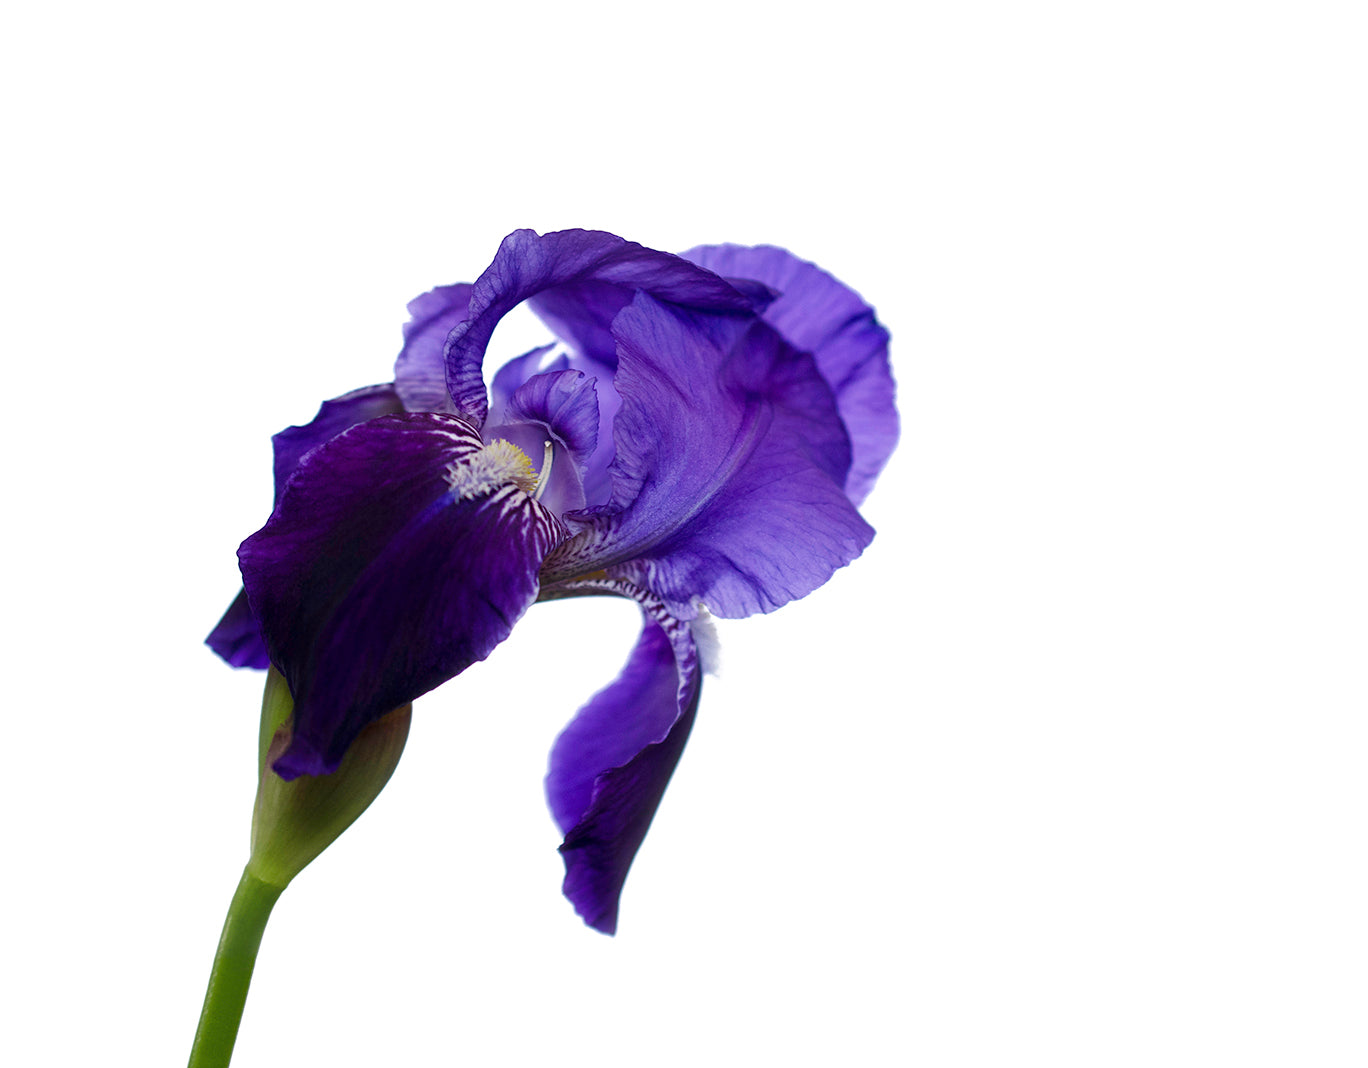 Iris On White Nature / Floral Photo Fine Art Canvas Wall Art Prints  - PIPAFINEART